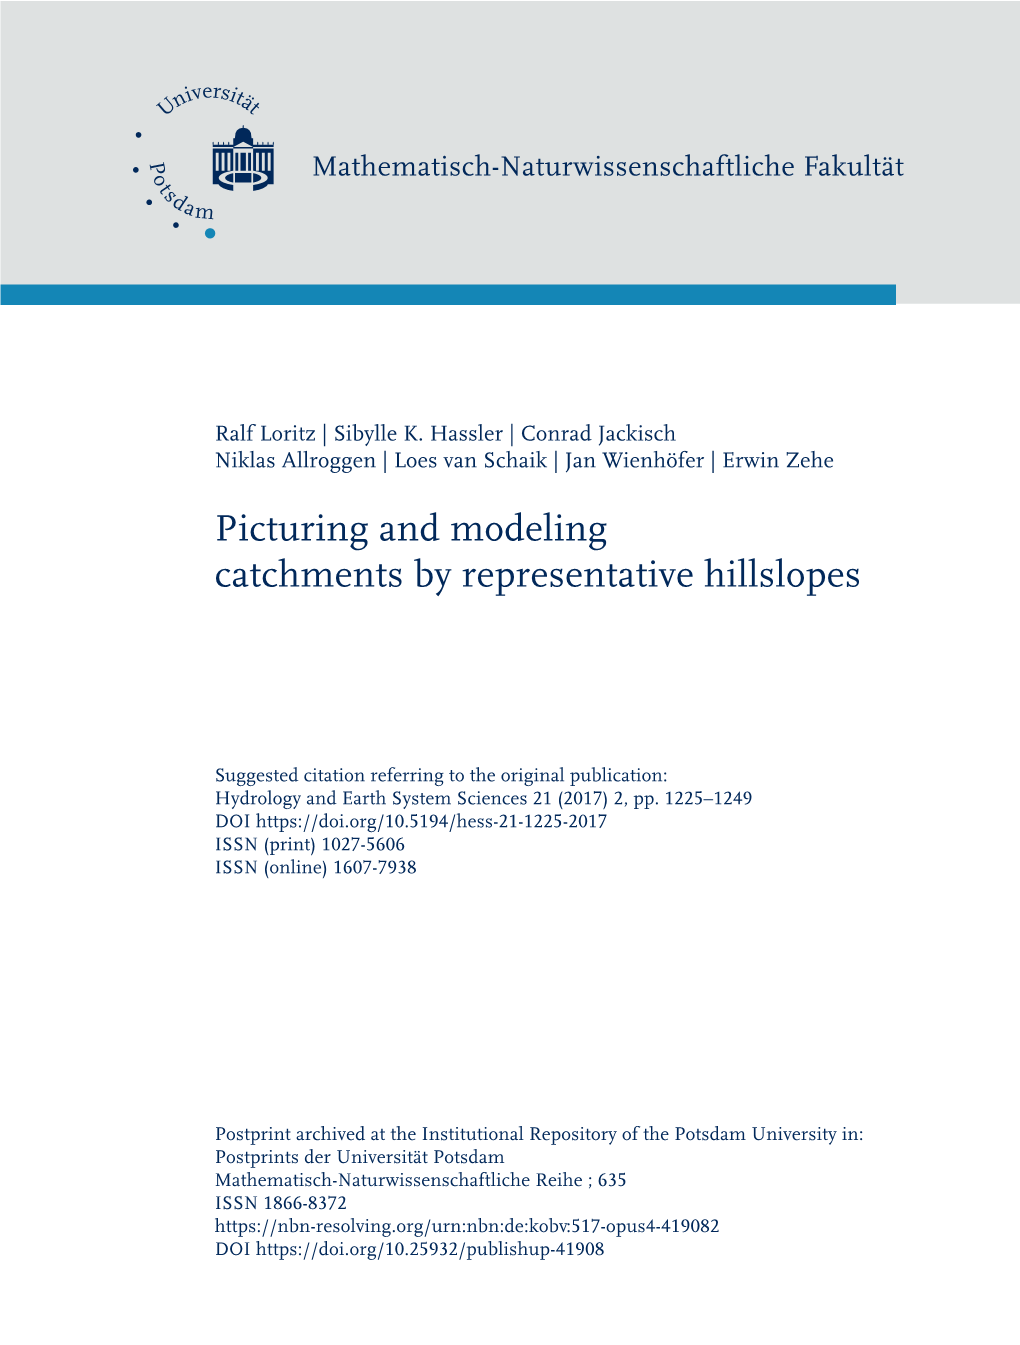 Picturing and Modeling Catchments by Representative Hillslopes